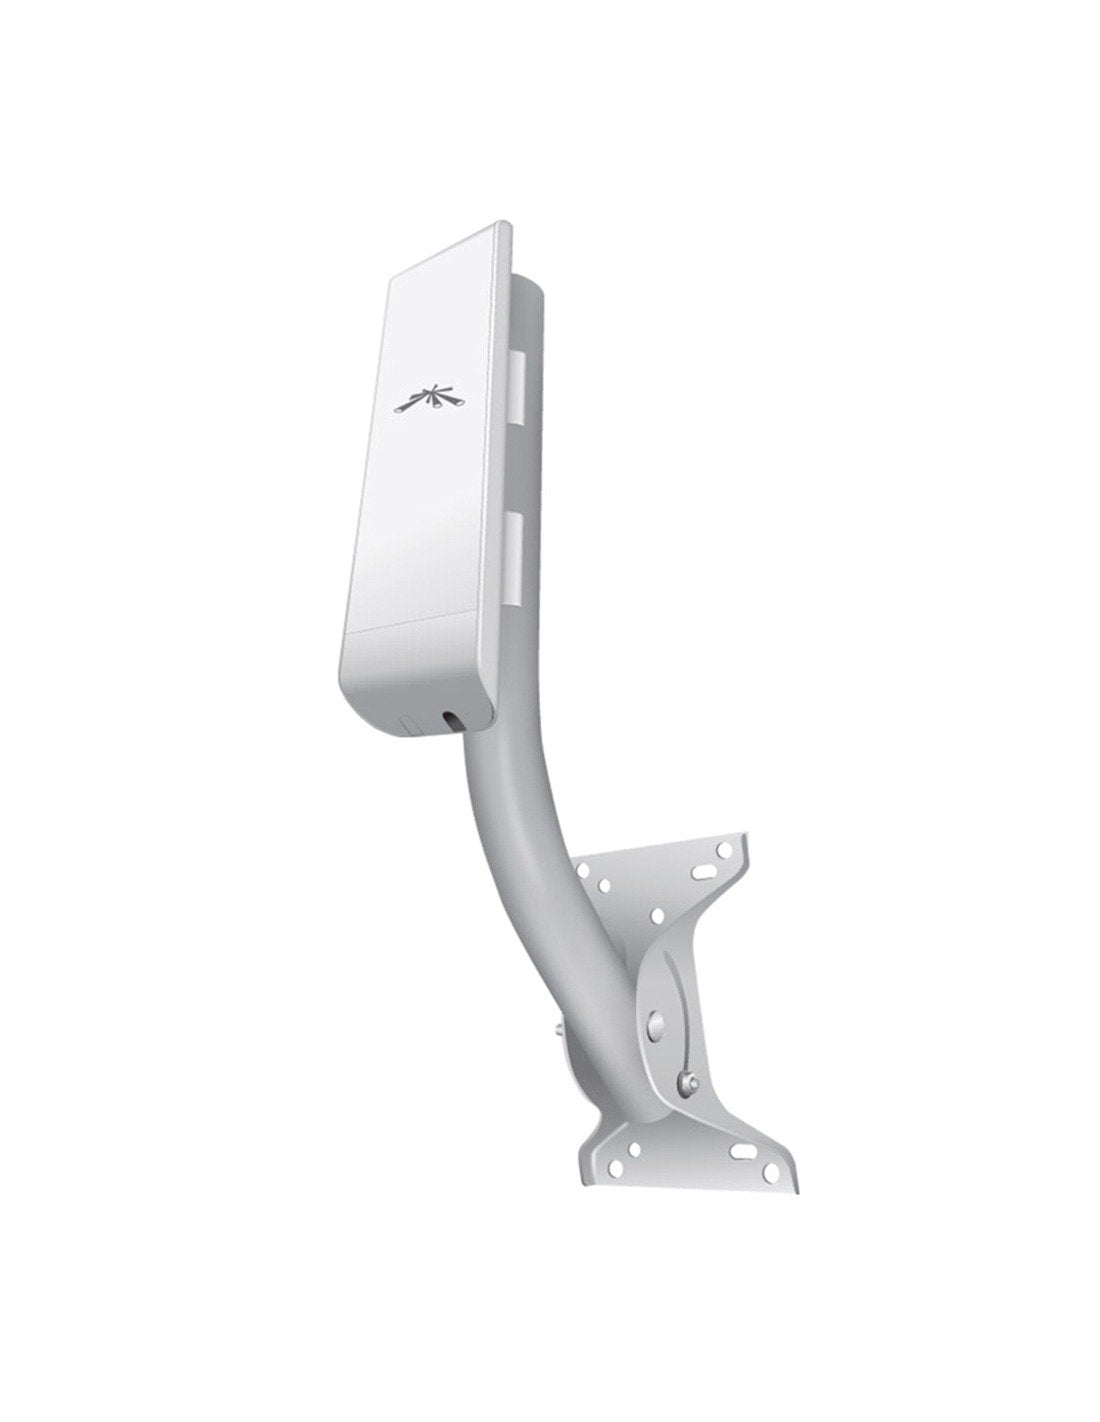 Ubiquiti airMAX Nanostation 2.4GHz Indoor, Outdoor Point to Multipoint application